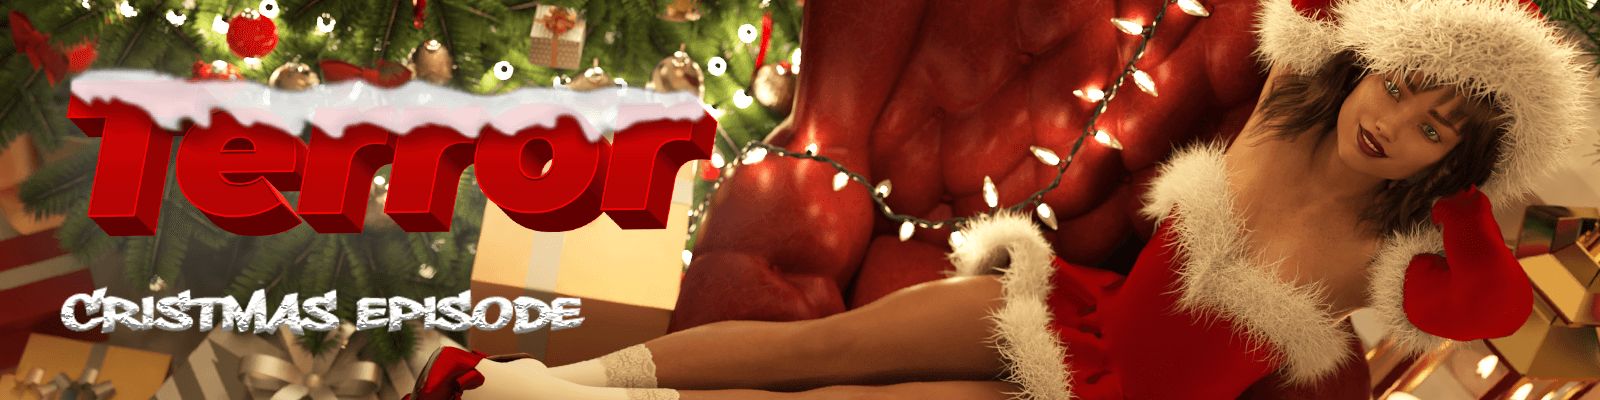 Terror Christmas Special PowerPlower Adult xxx Game Download